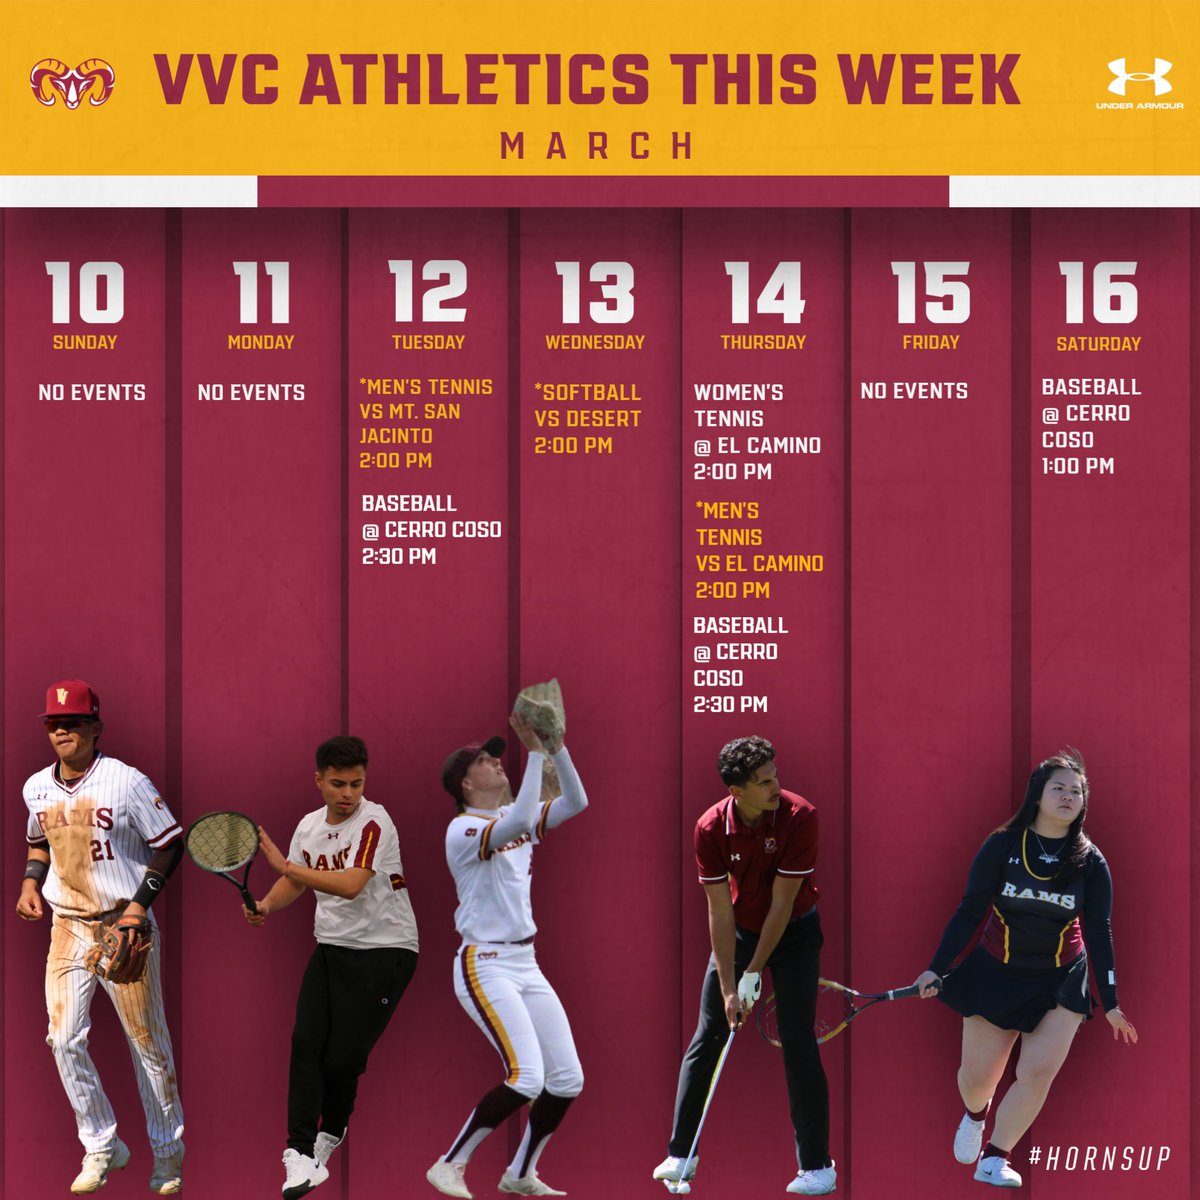 There are a number of home events this week. Come out to support! Stay connected with us each week as we inform you on our games and events. . . . #VVC I #Athletics I #RAMS I #vvcathletics | #GoRams I #GoVVC I #hornsup🤘